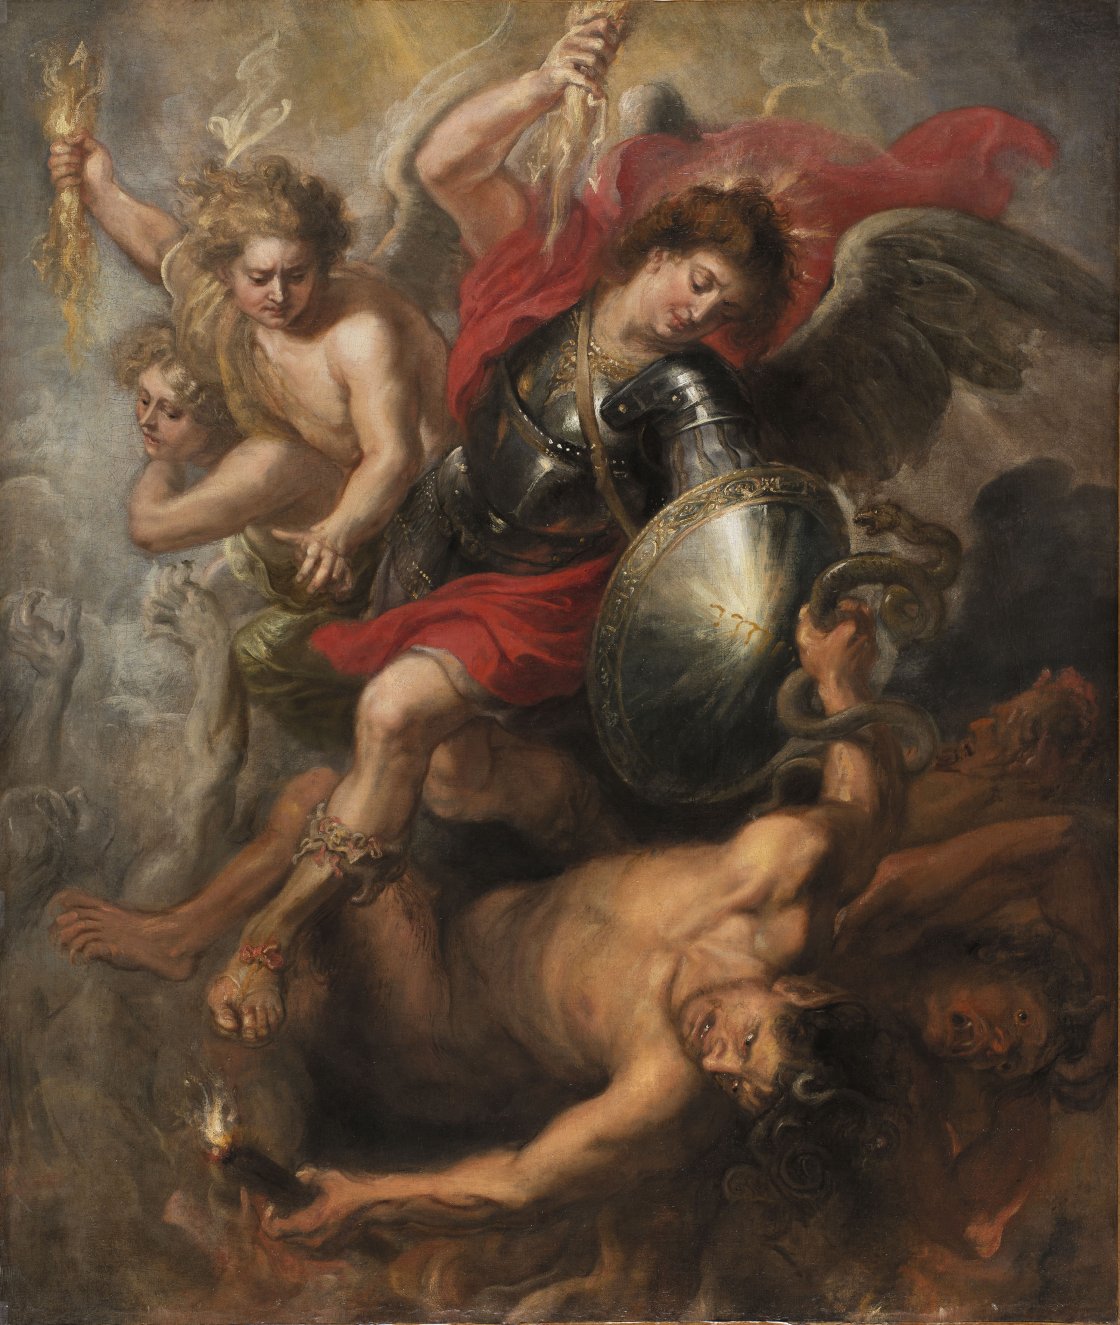 St. Michael expelling Lucifer and the Rebel Angels. San Miguel expulsando a Lucifer y a los ángeles rebeldes, c. 1622